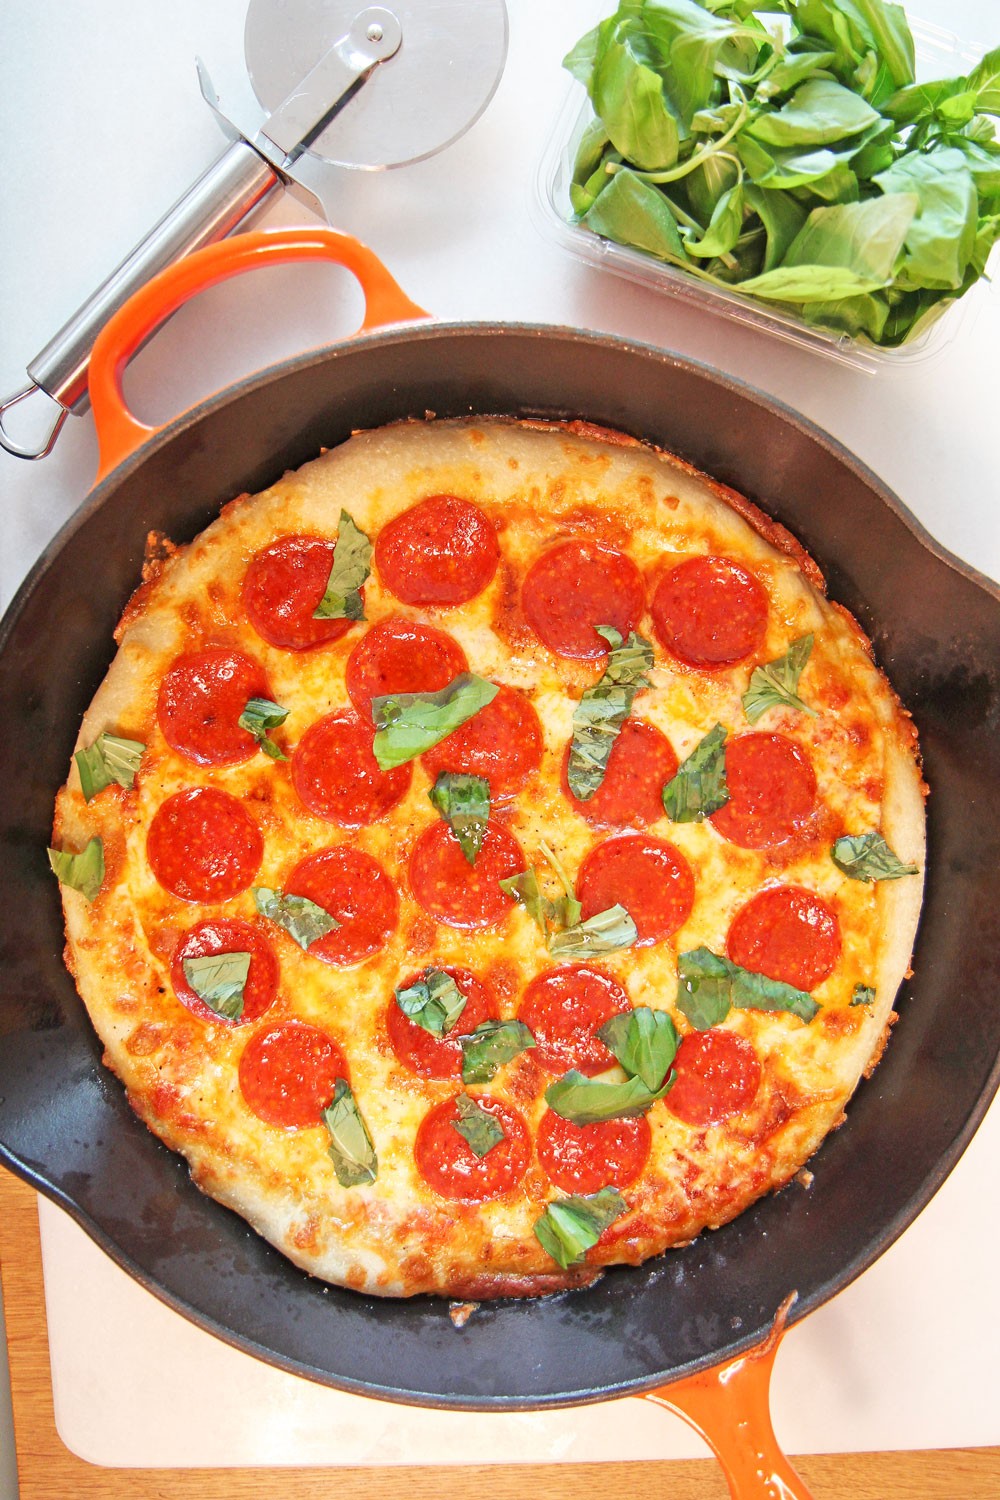 How to Make Pizza in a Cast Iron Pan. This is super easy. Just get pizza dough, marinara, mozzarella cheese, pepperoni, and basil. Pizza making is so easy and this tastes just like NYC pizza. Happy cooking! www.ChopHappy.com #howtomakepizza #pizza